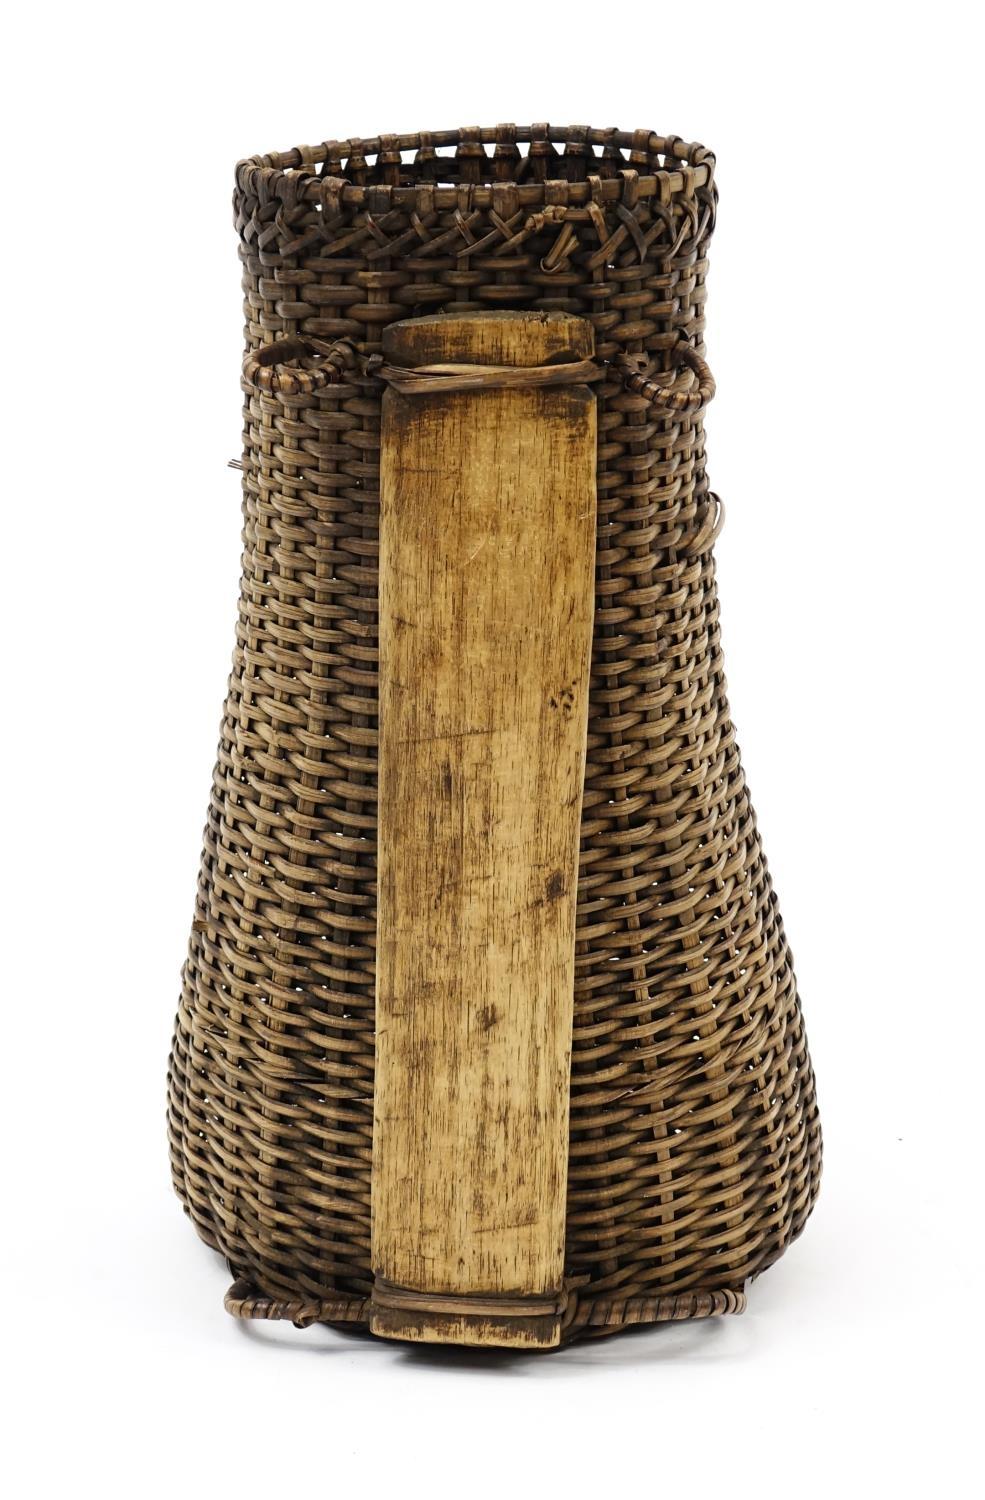 African tribal staff carved with geometric motifs and a cane carrier, 125cm in length : For Extra - Image 5 of 6